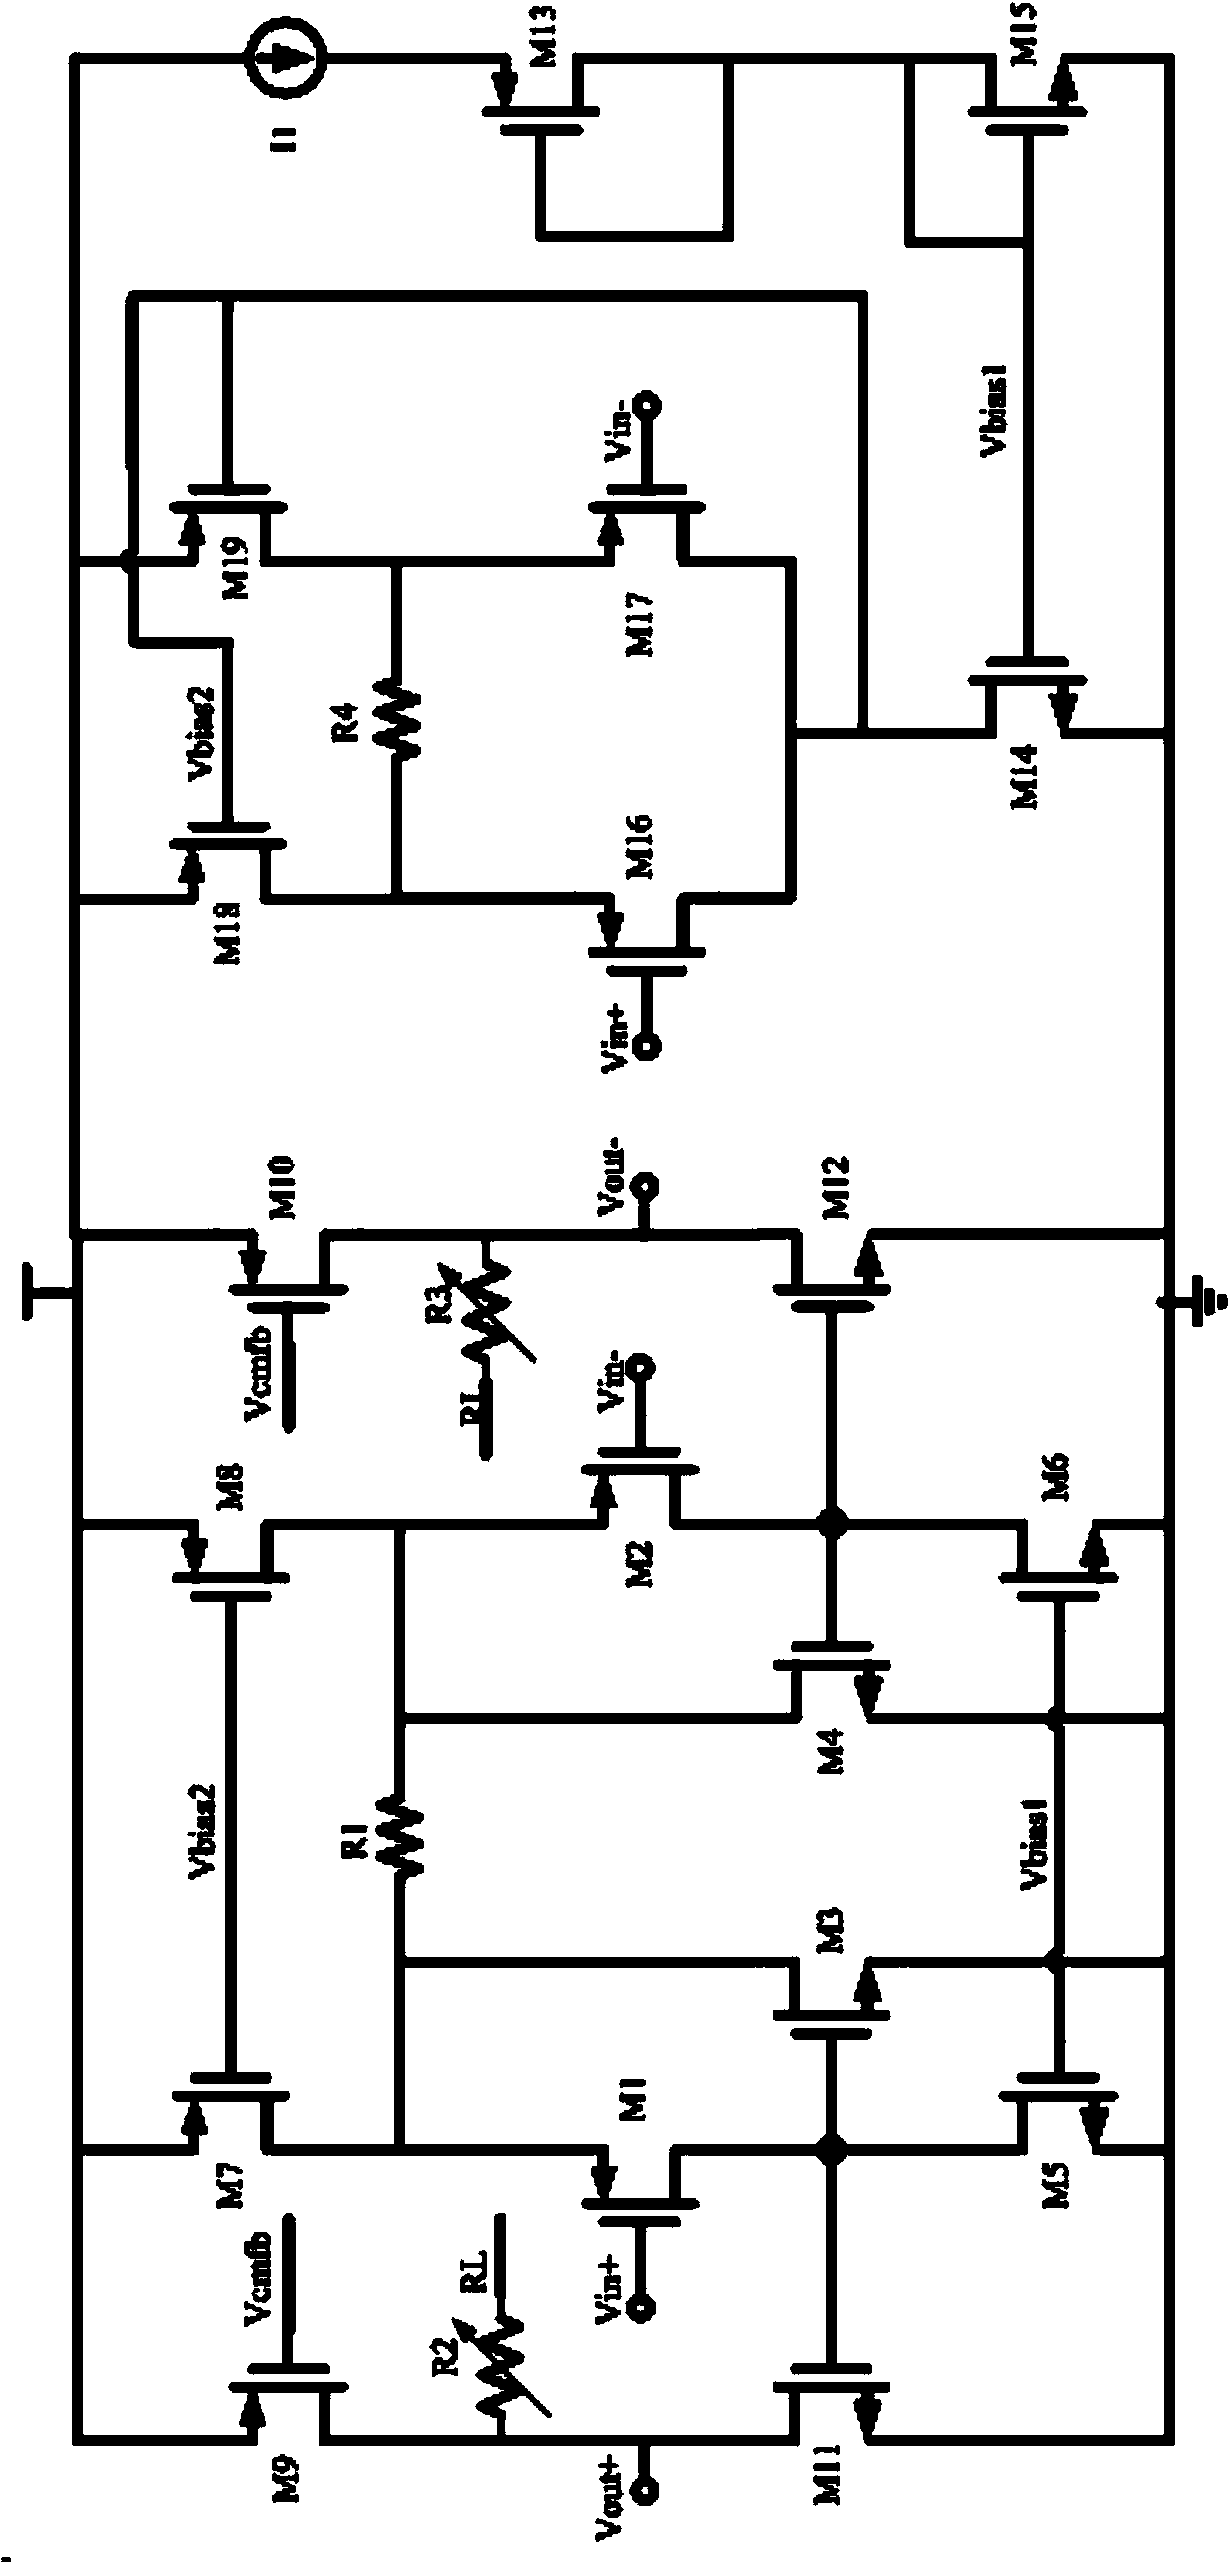 Low-power-supply-voltage programmable gain amplifier